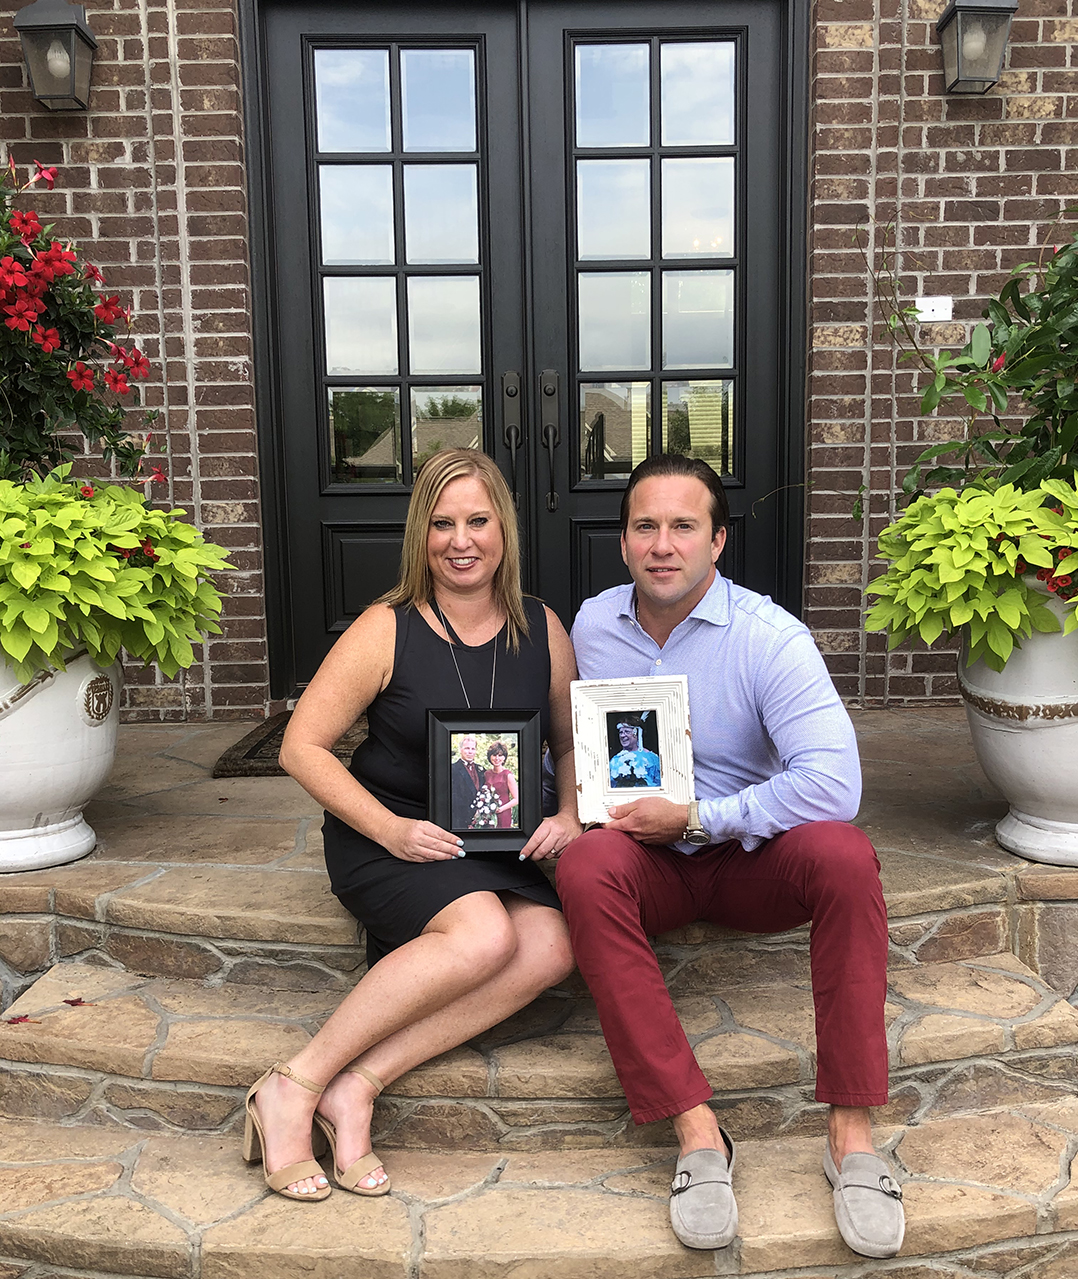 Finding the givers: LLS Man and Woman of the Year both from Fishers